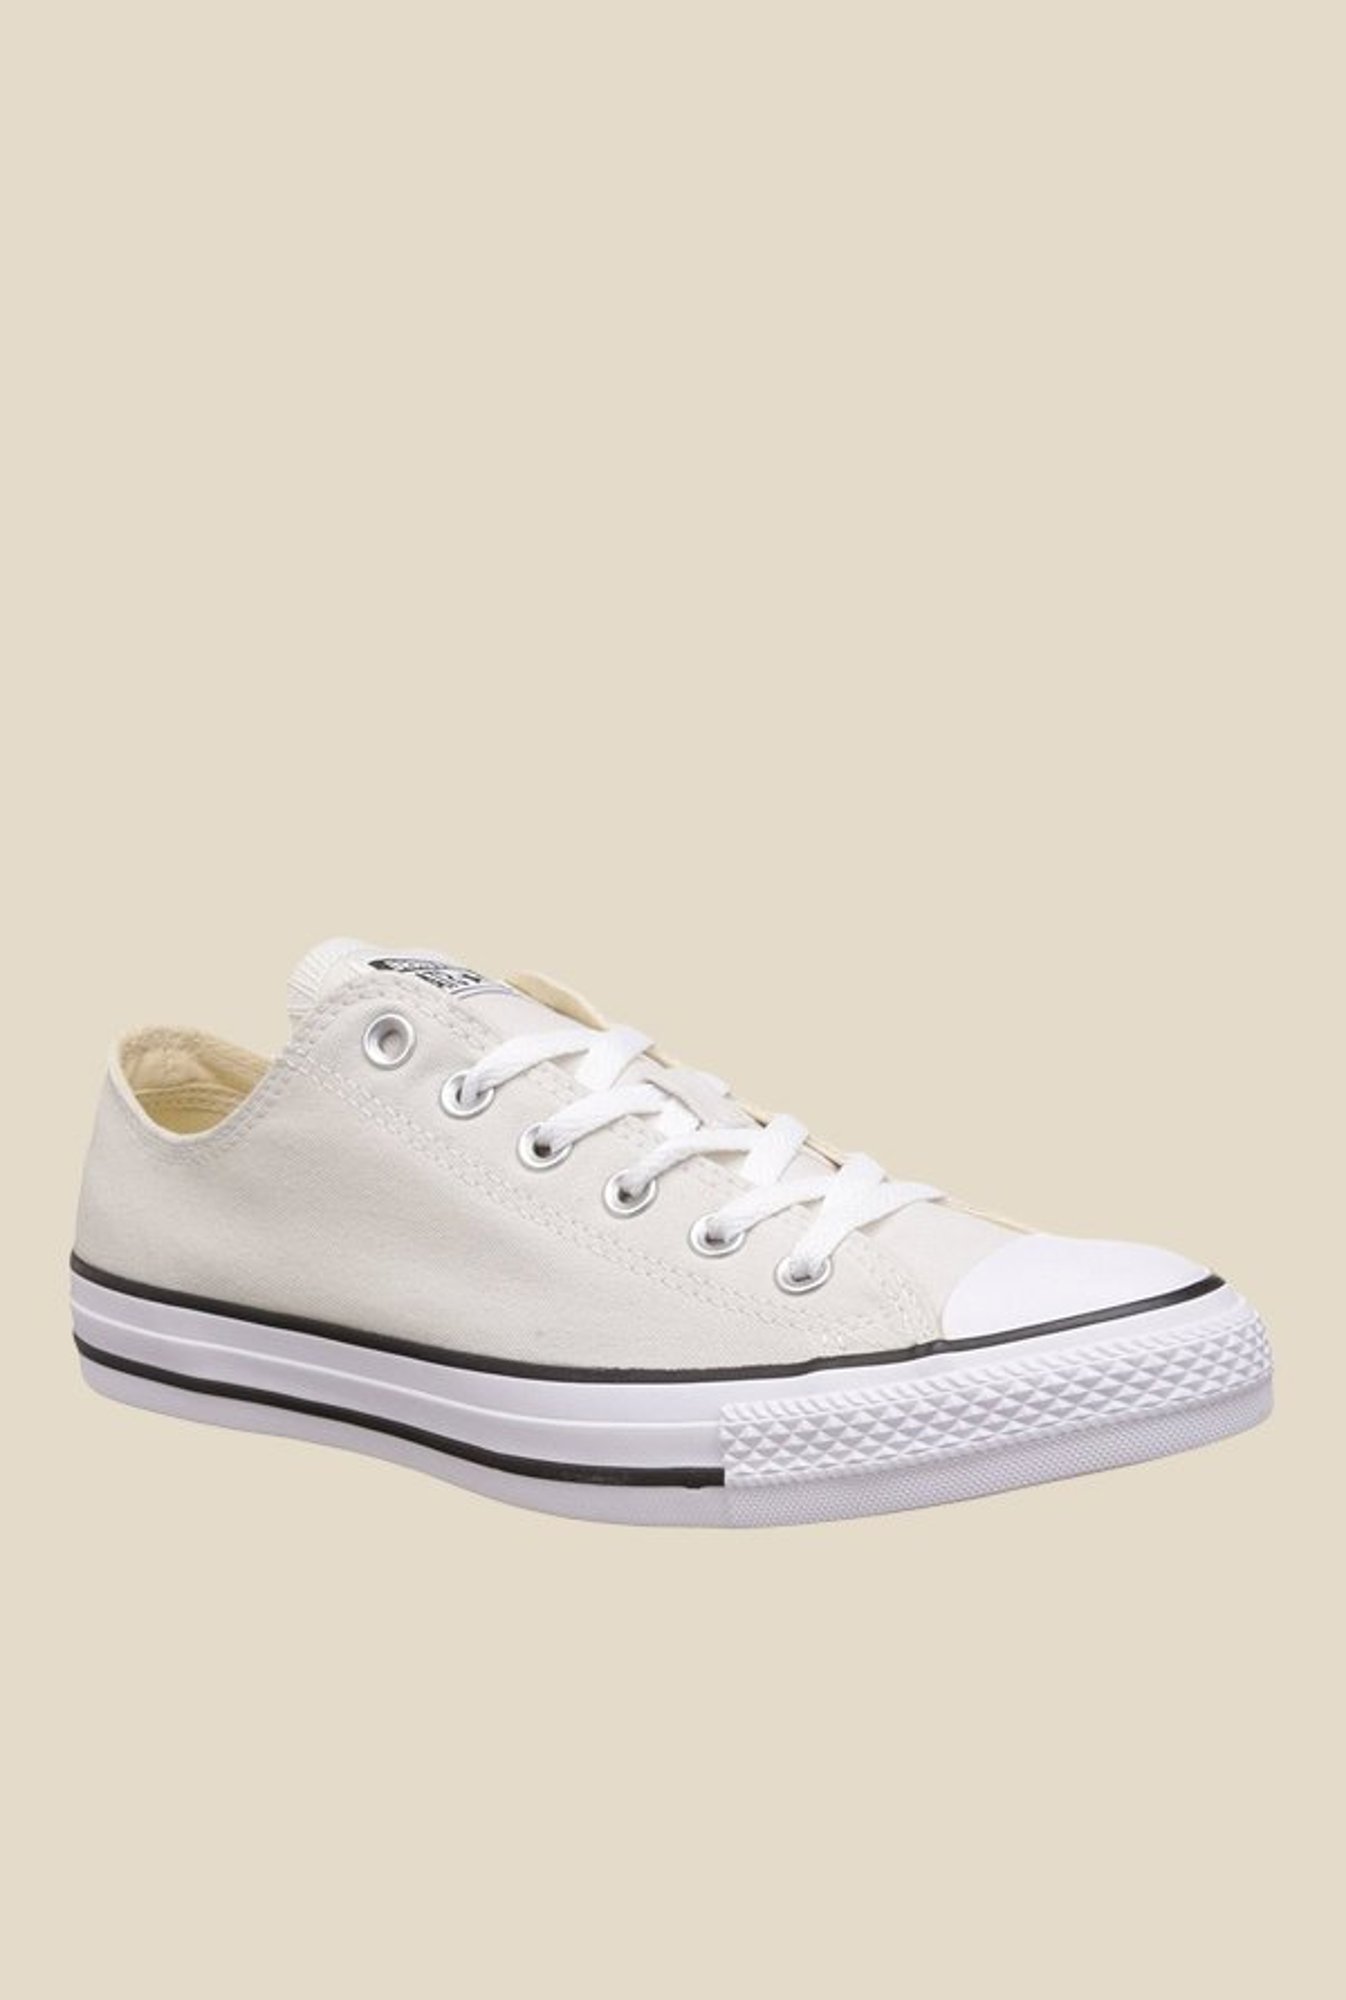 satire Ontleden Knop Buy Converse All Star Series Buff & White Sneakers from top Brands at Best  Prices Online in India | Tata CLiQ